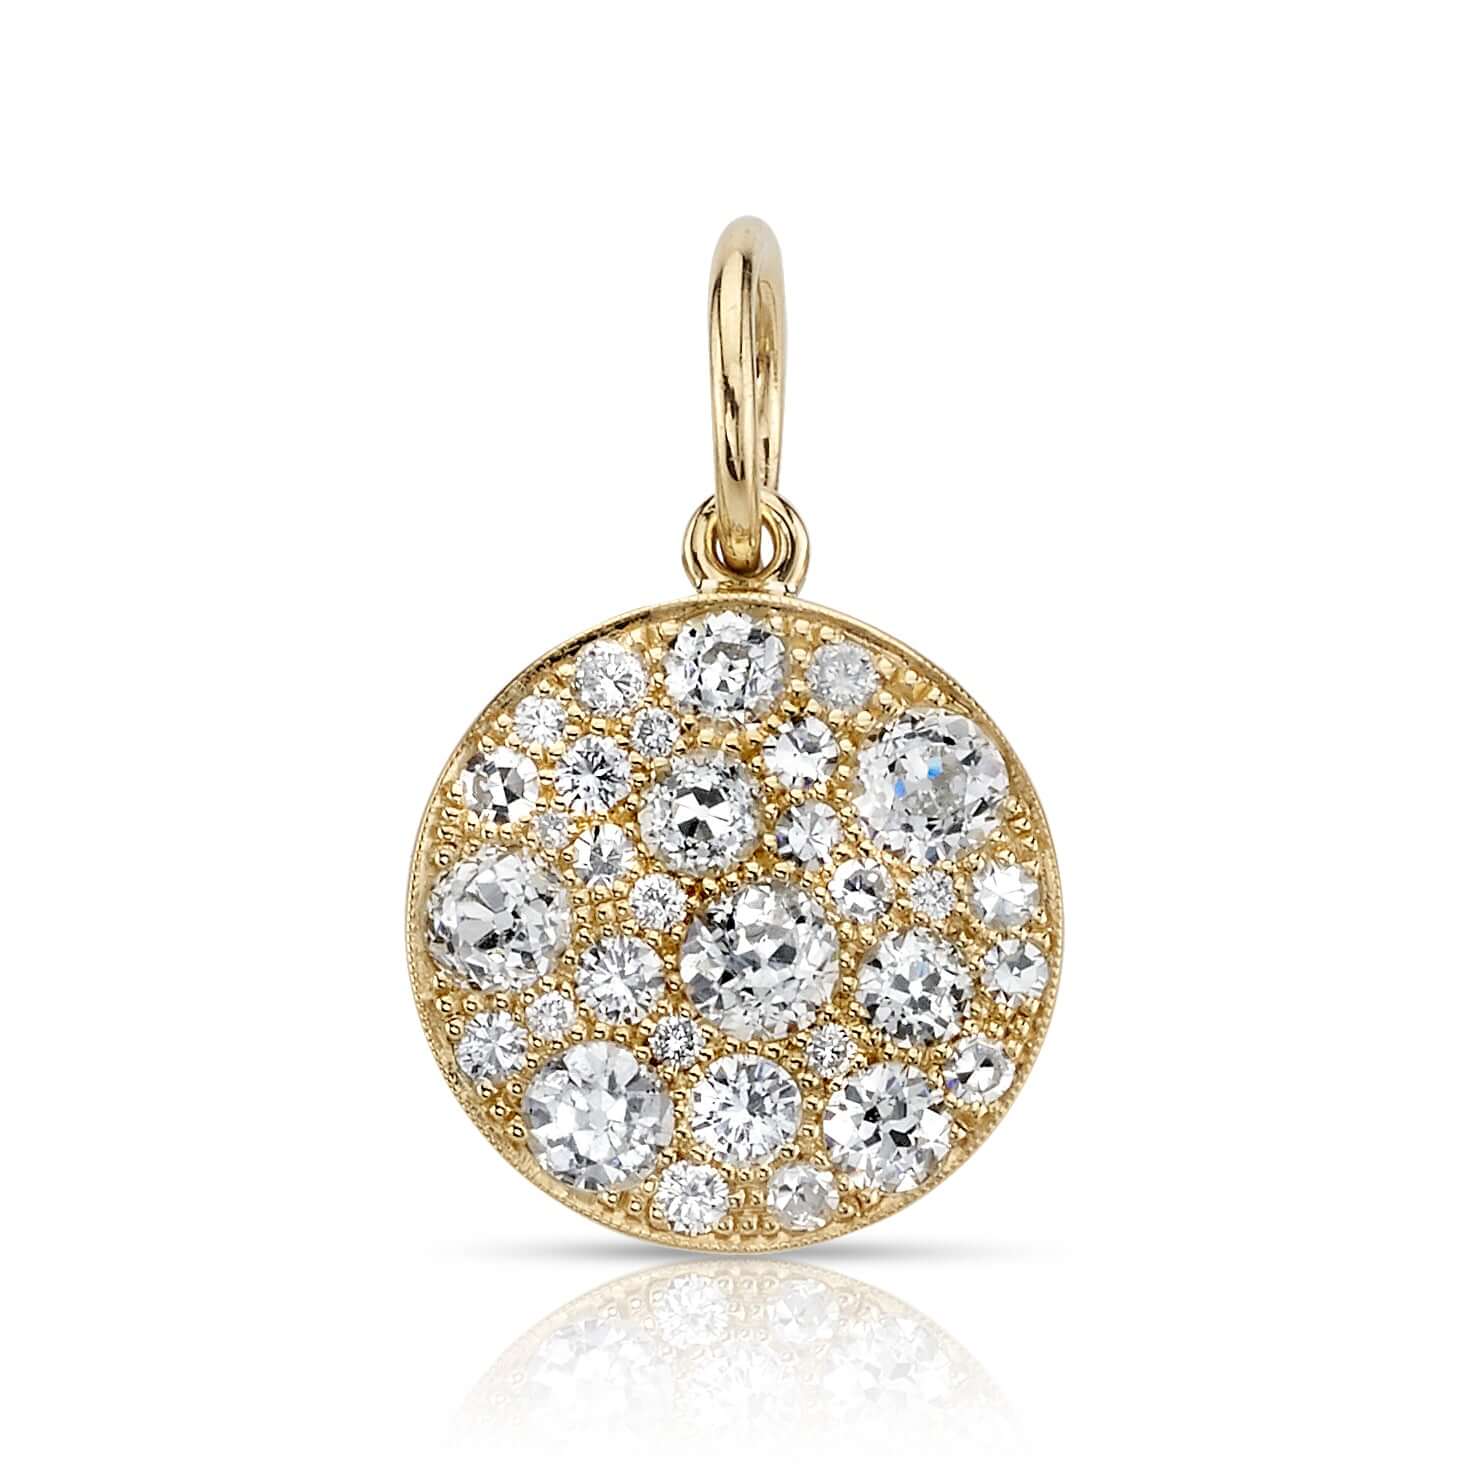 SINGLE STONE ROUND COBBLESTONE CHARM PENDANT featuring Approximately 1.70ctw various old cut and round brilliant cut diamonds set in a handcrafted 18K yellow gold round cobblestone pendant. Charm measures approx. 15mm. Available in an oxidized or polished